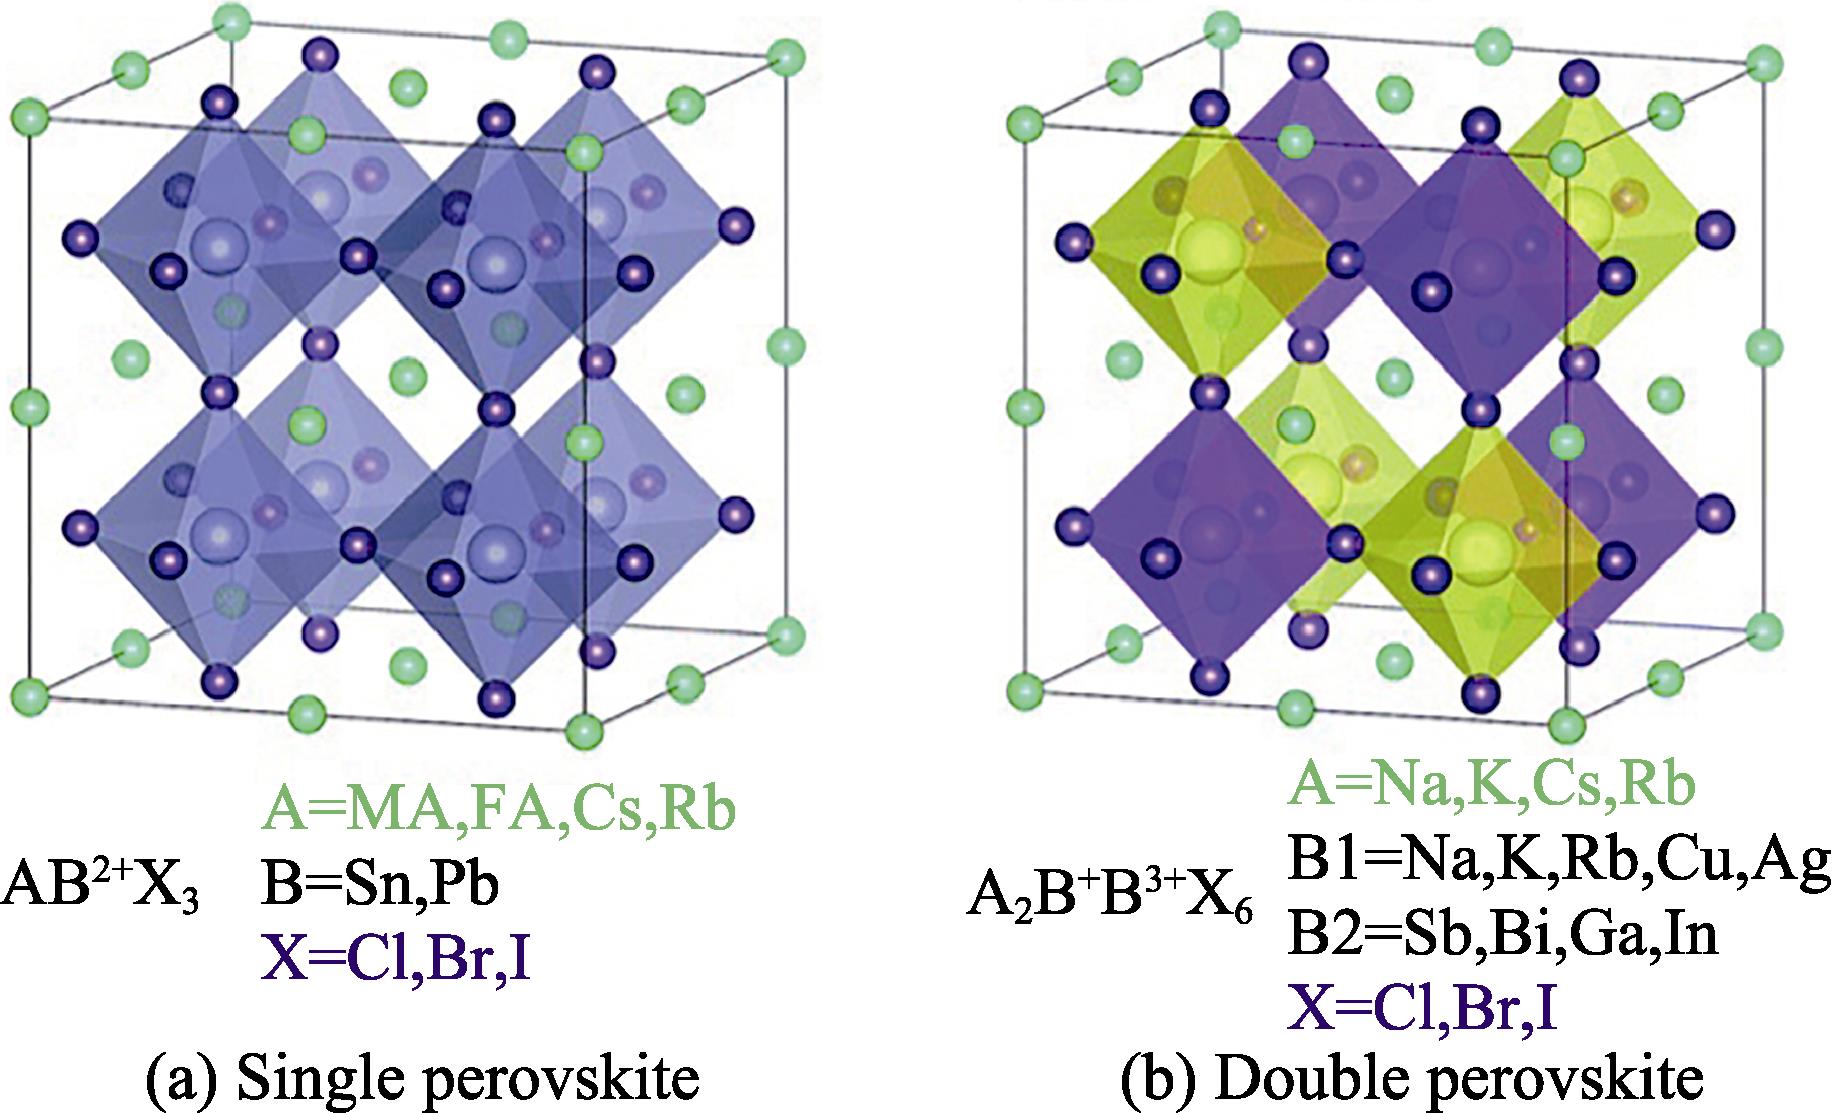 Crystal structures of (a) single (AB2+X3) and (b) double (A2B+B3+X6) halide perovskite[5]